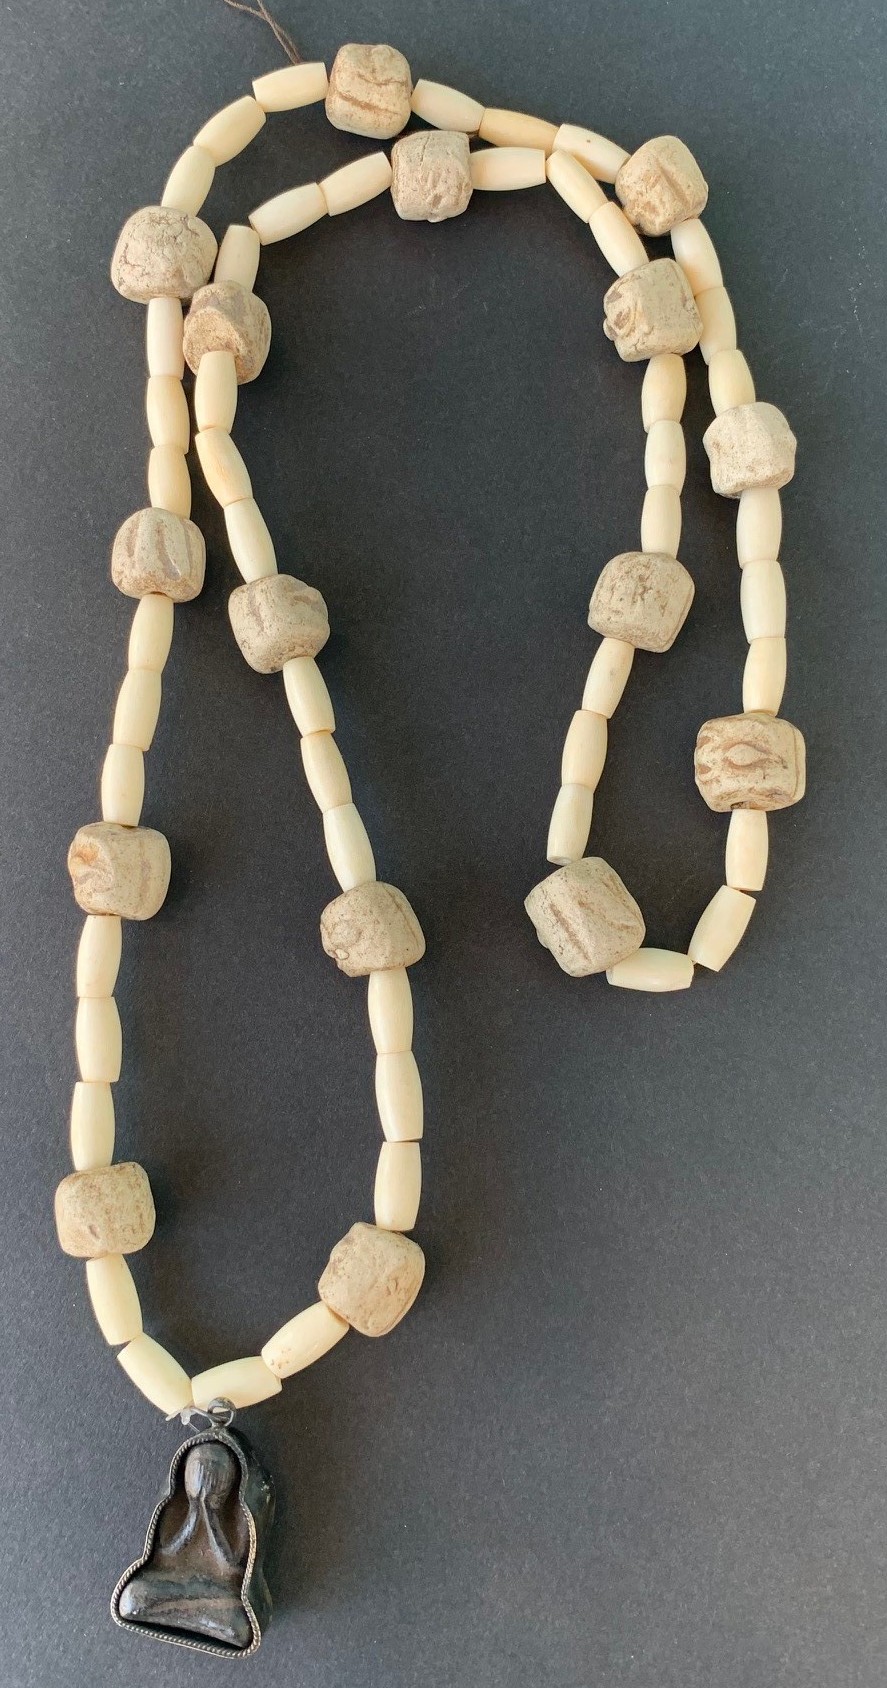 Necklace, “Carved Cream Beads with Prayer Pendant”, Jewelry